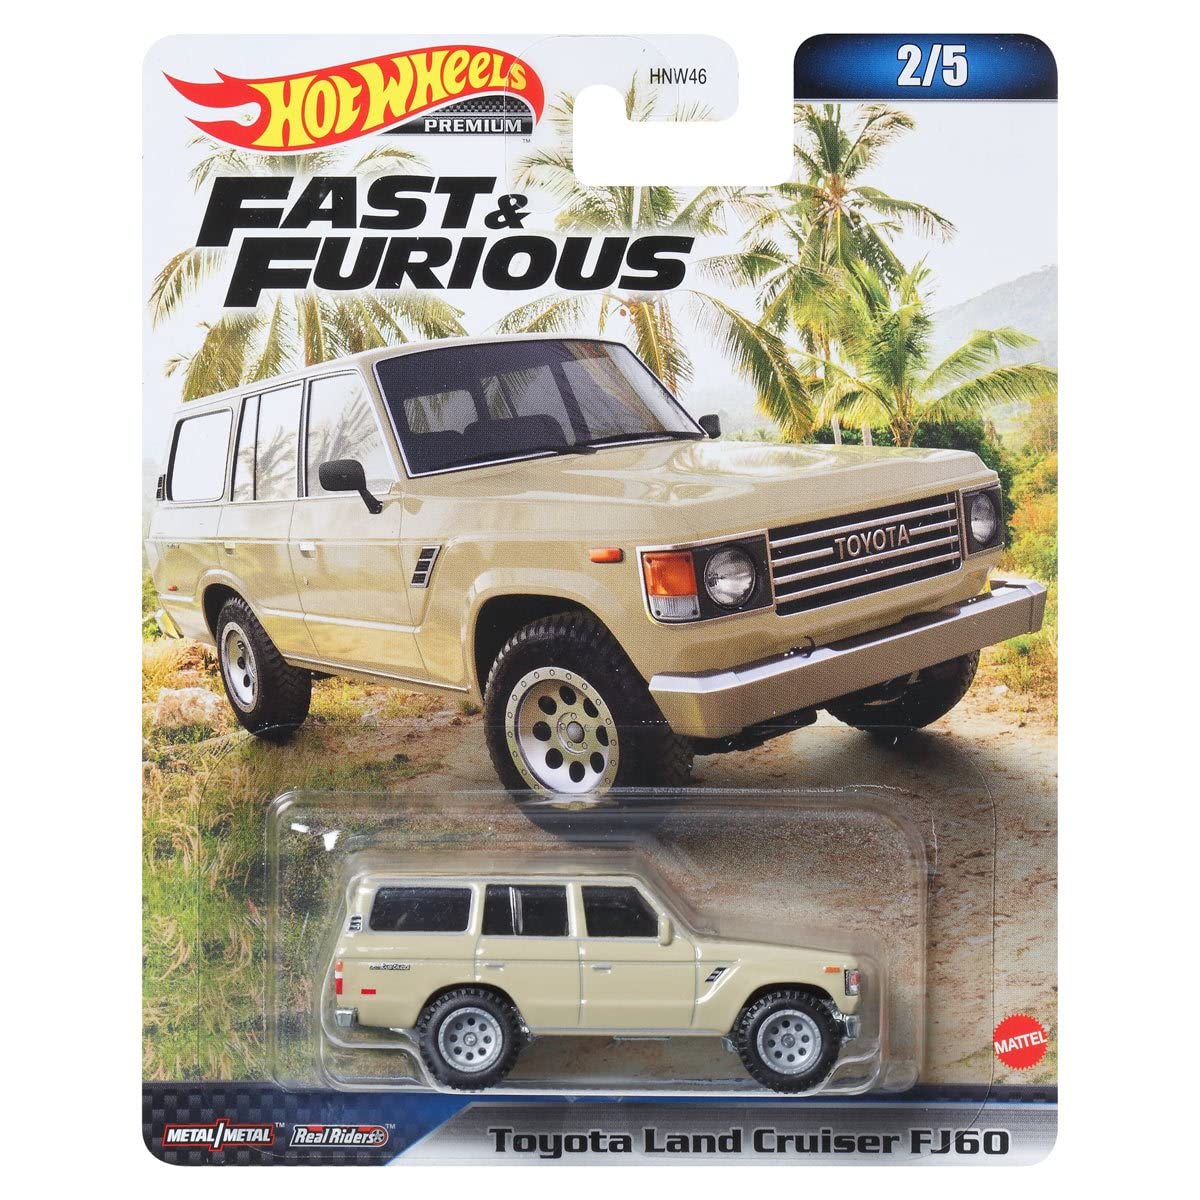 Hot Wheels Fast and Furious 1:64 Toyota Land Cruiser FJ60 [Ages 3 and Up]